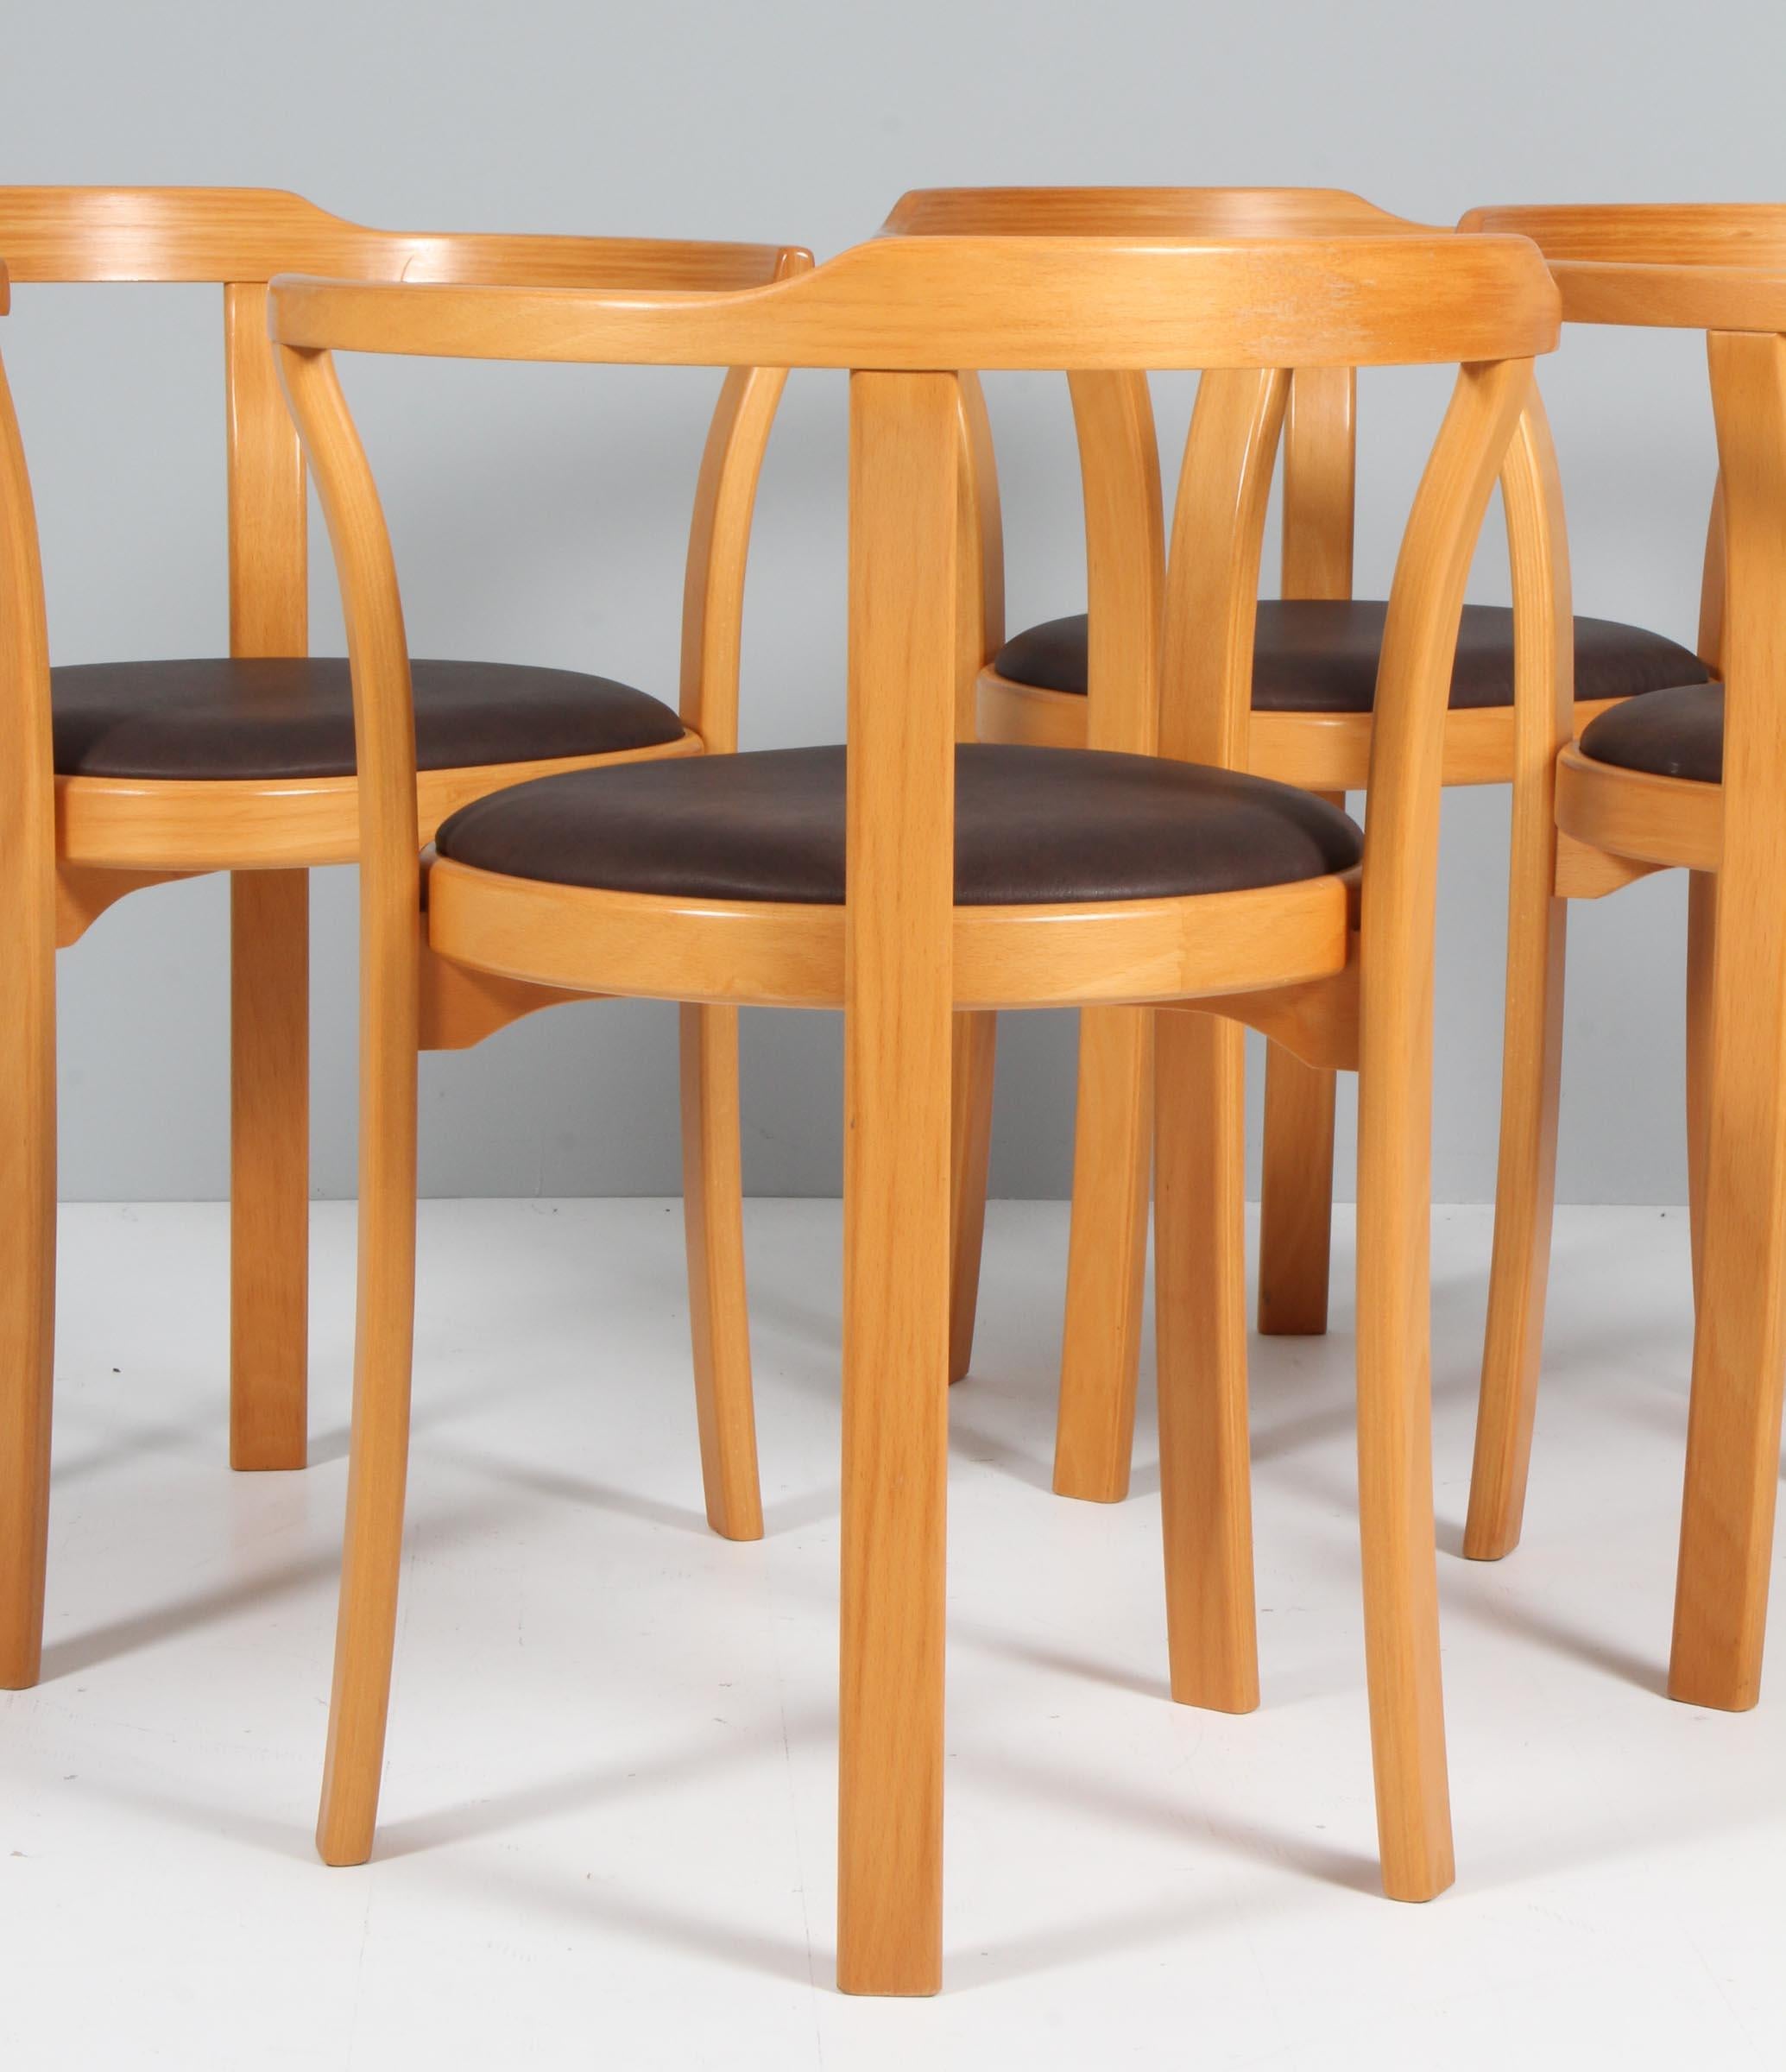 Mid-20th Century Farstrup Set of Four Armchairs / Dining Chairs in Beech and Leather For Sale